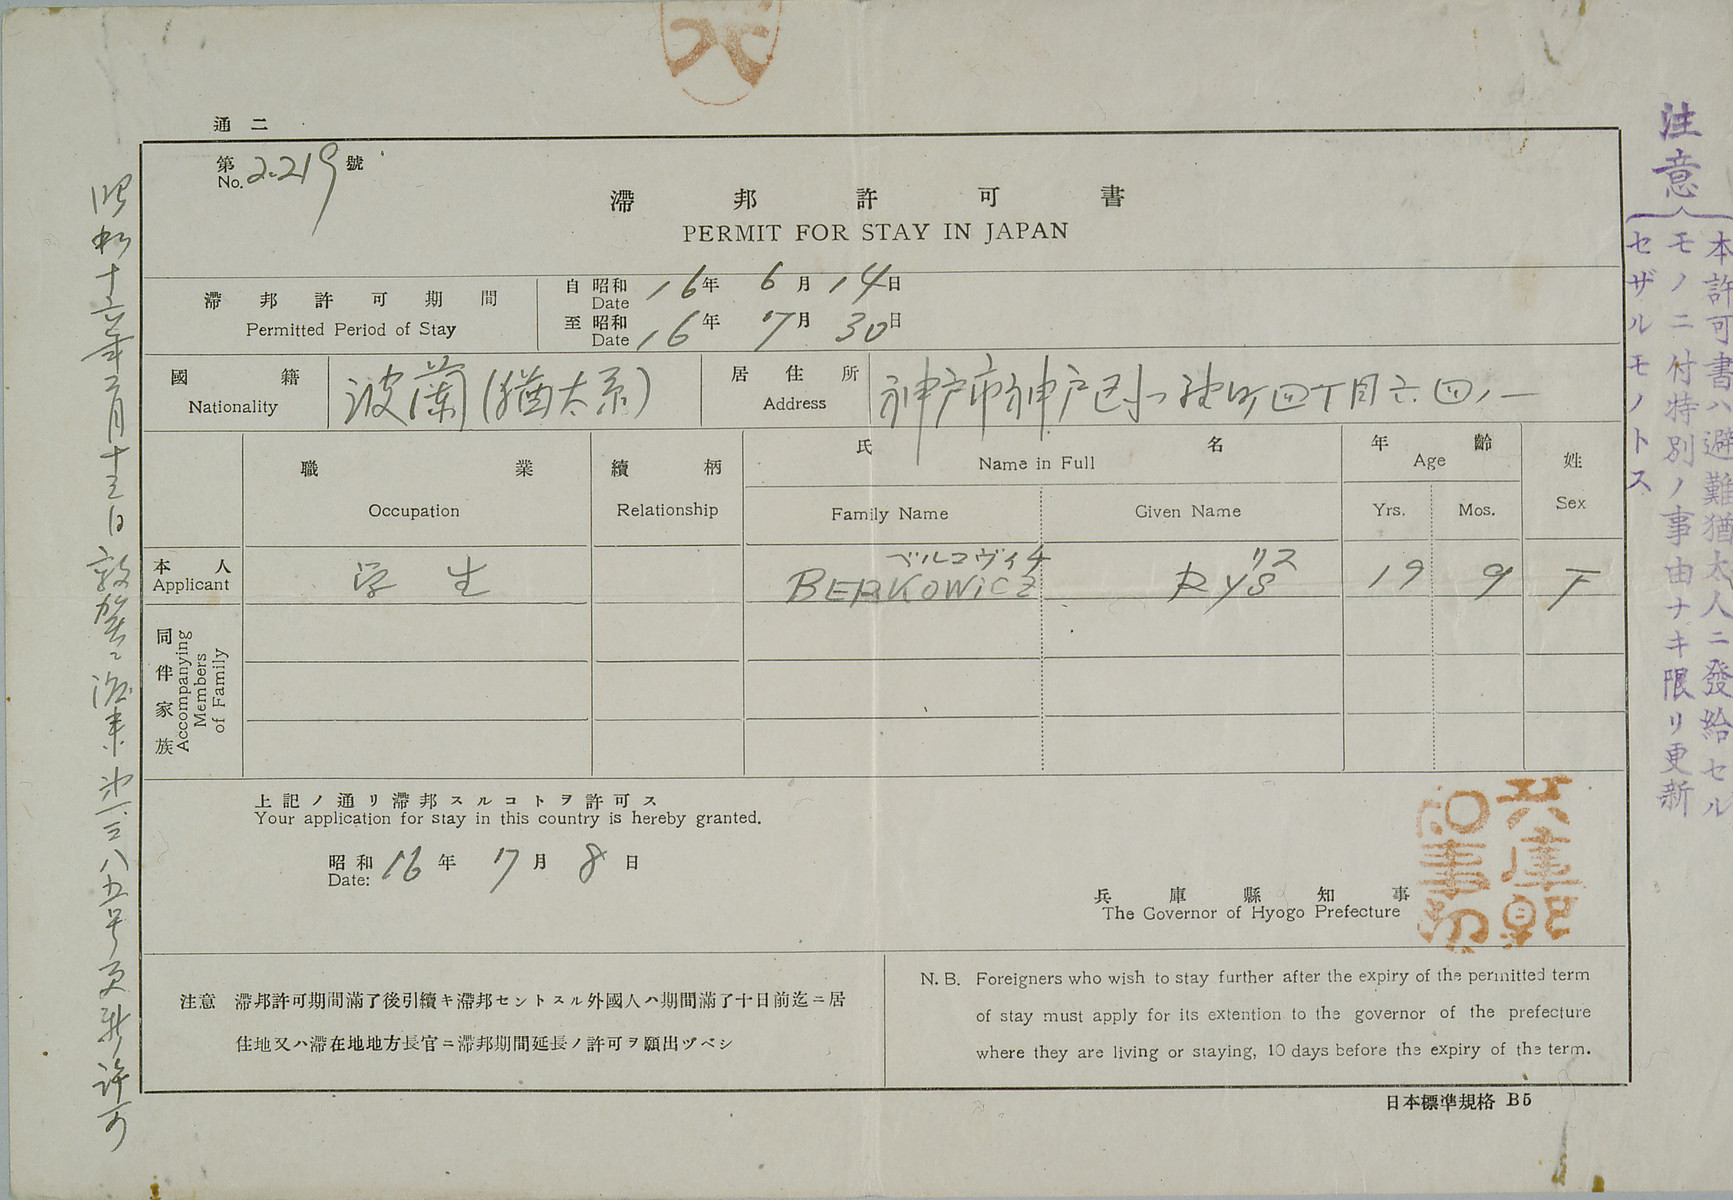 A permit issued to Rys Berkowicz for "Stay in Japan."

Lacking final destination visas, most Polish Jewish refugees stayed in Japan much longer than their 10-day transit visas issued by Sugihara allowed. Many feared the day when Japanese authorities would no longer extend their stay with permits like this one.